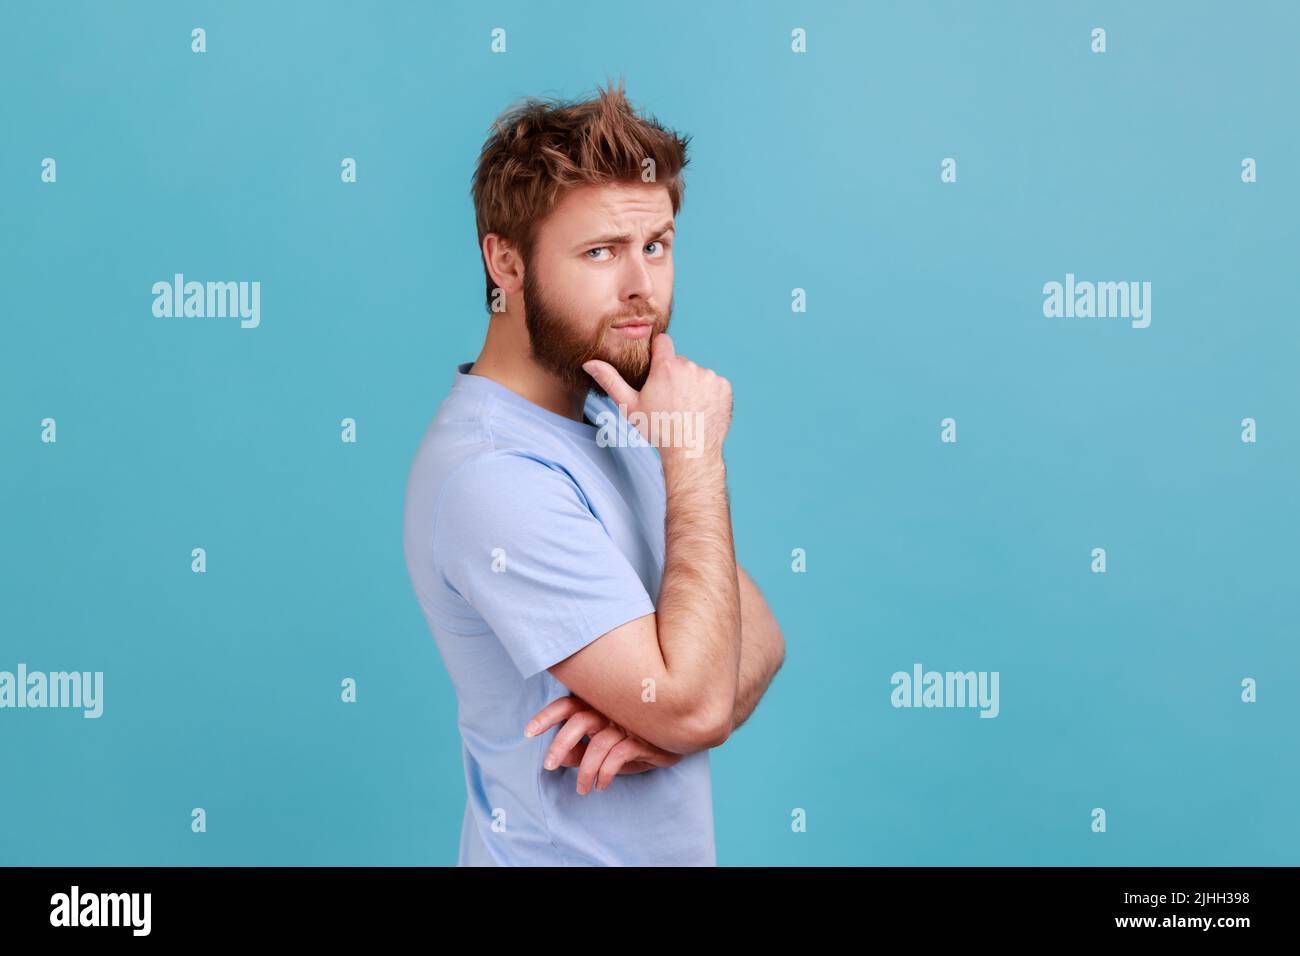 Side view portrait of thoughtful young bearded man touching chin while pondering plan, having doubts about difficult choice, not sure. Indoor studio shot isolated on blue background. Stock Photo